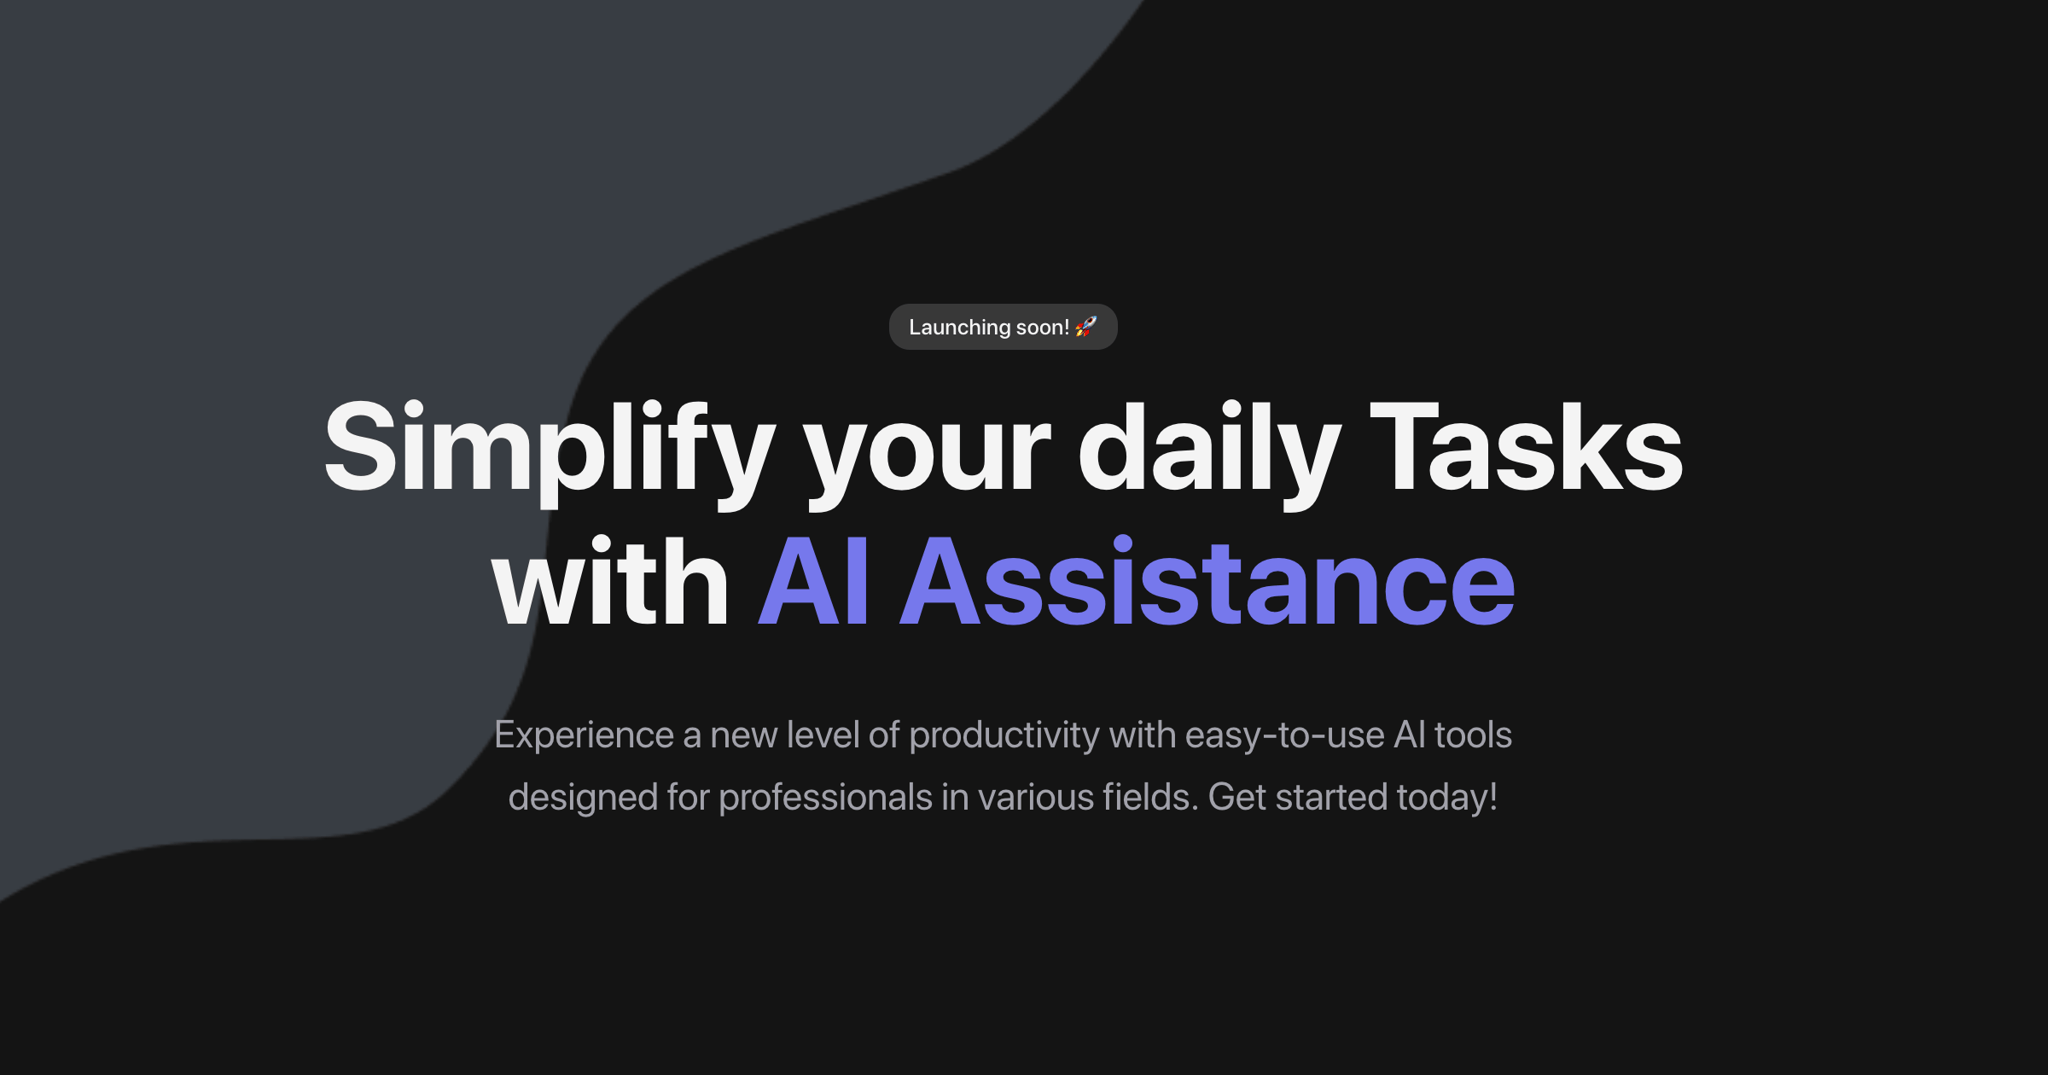 Zentask - A tool to simplify work and daily routines